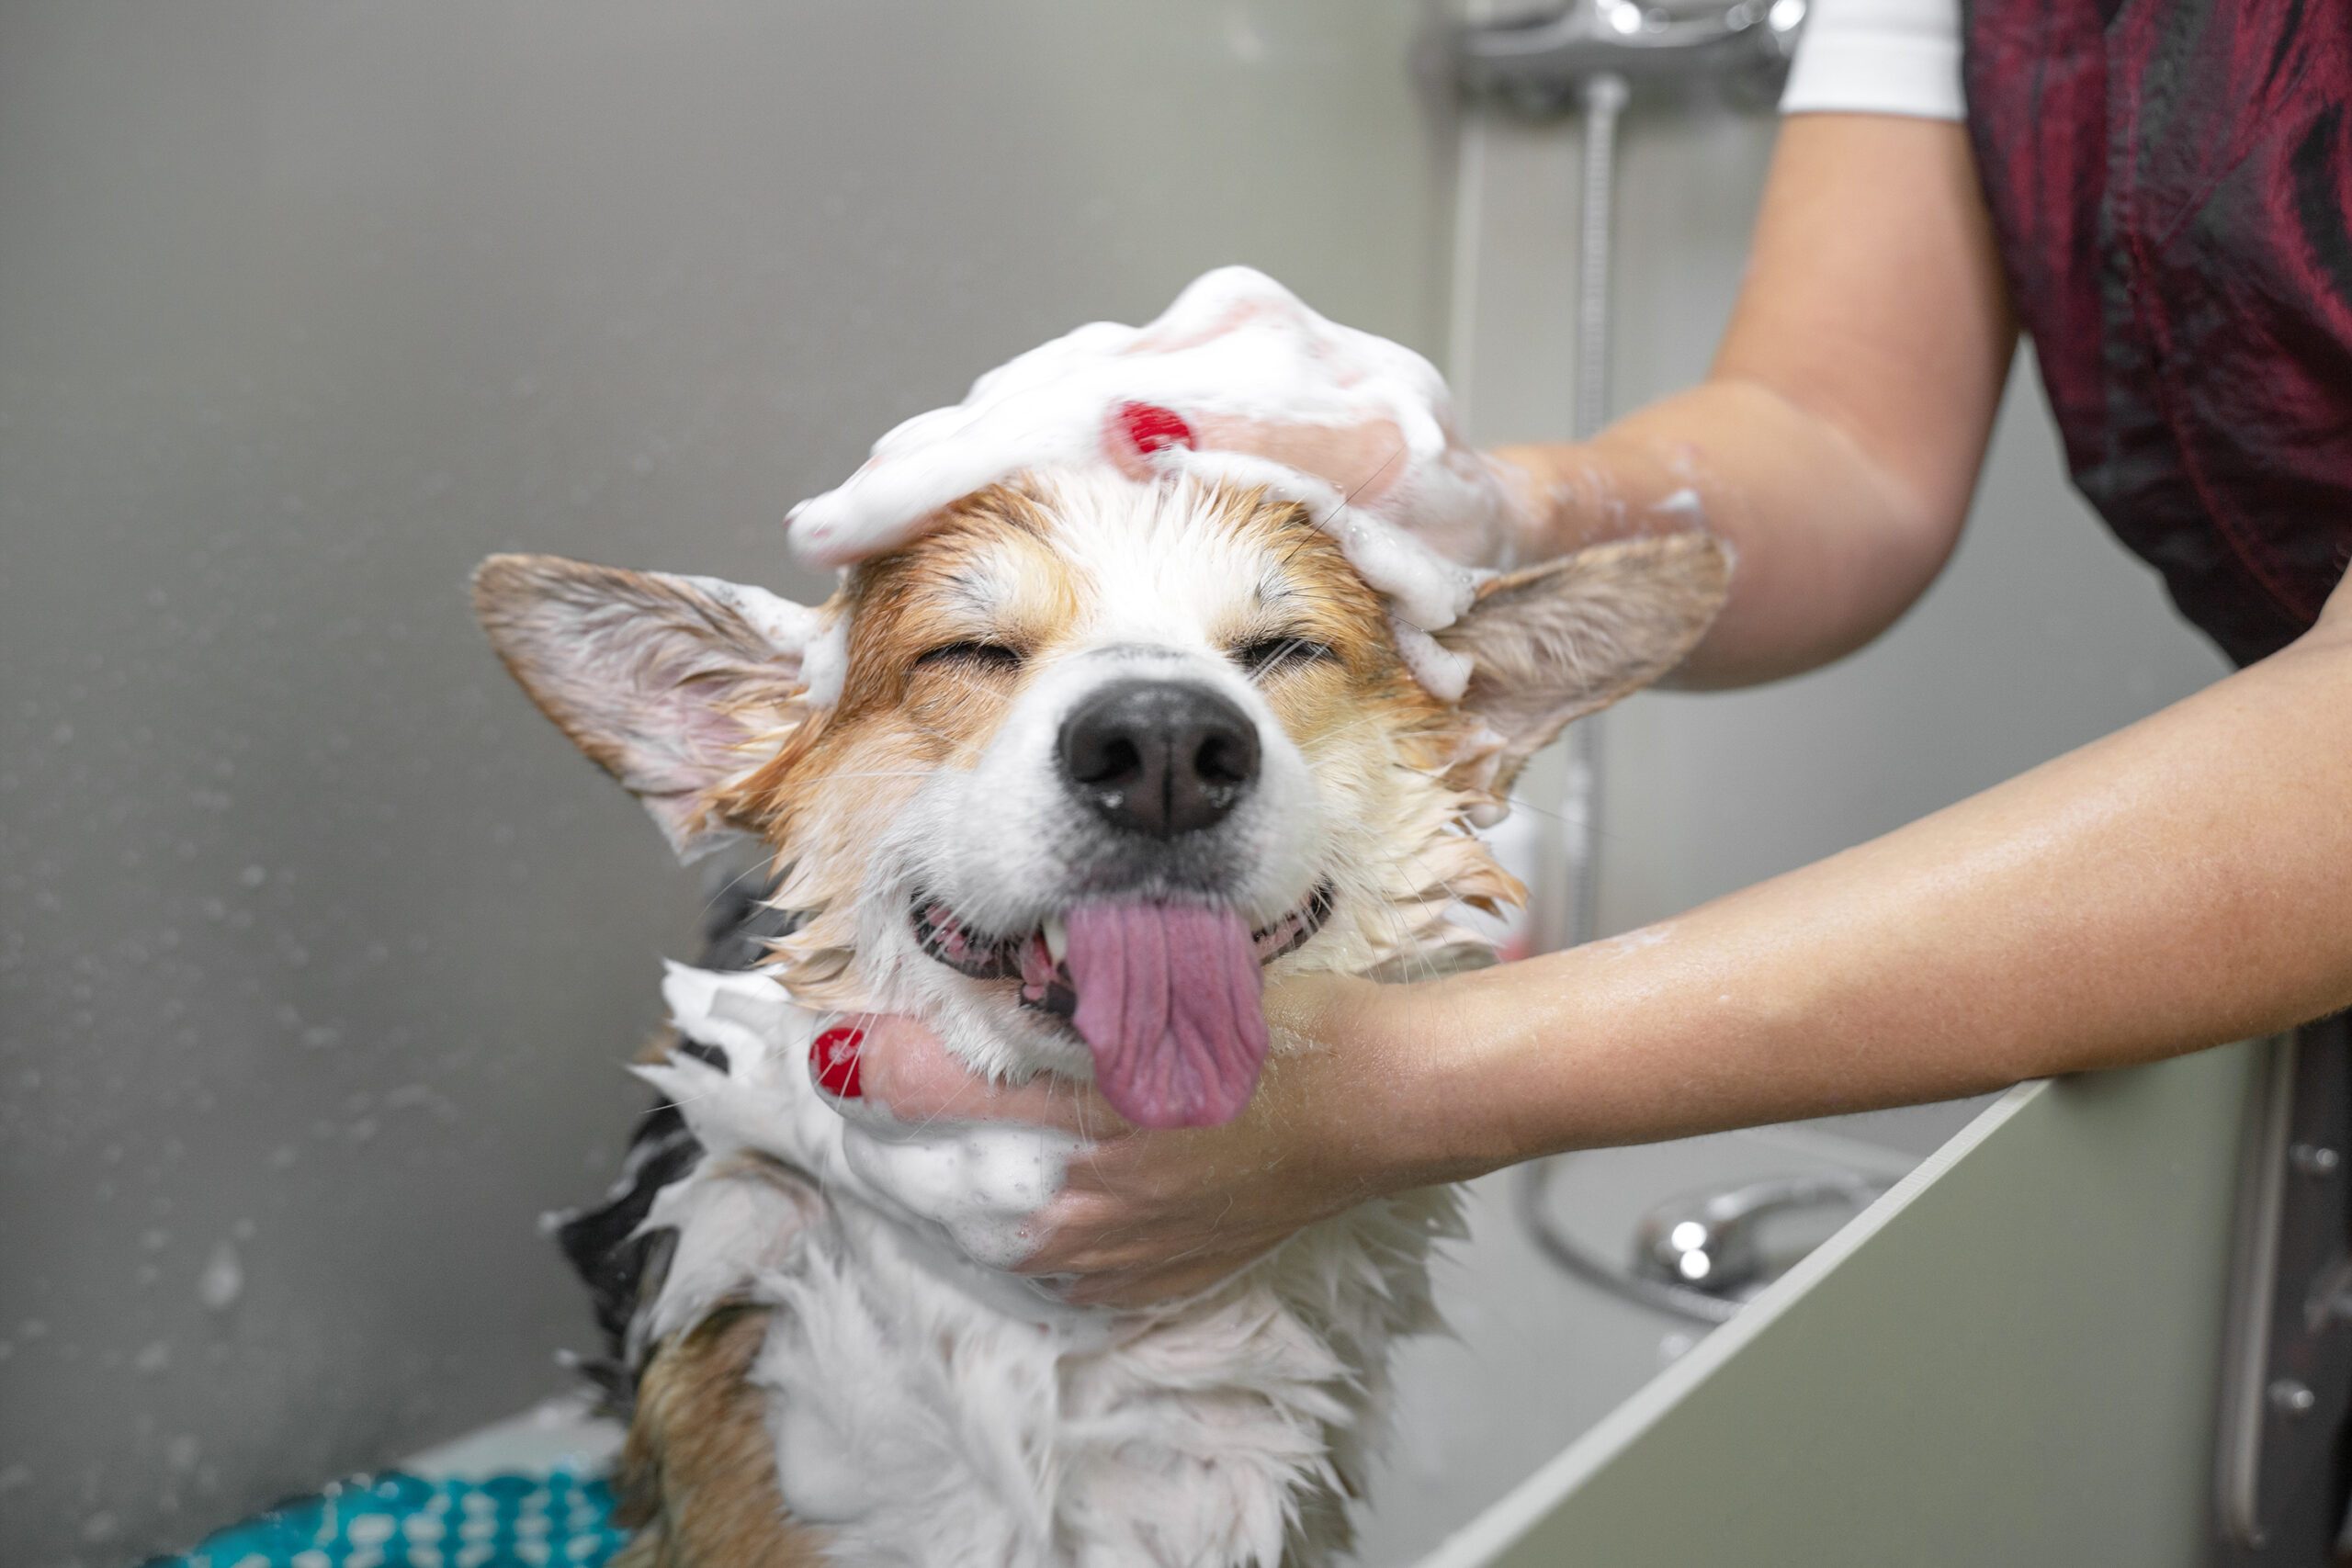 The dog parent’s guide to proper pupper grooming at home